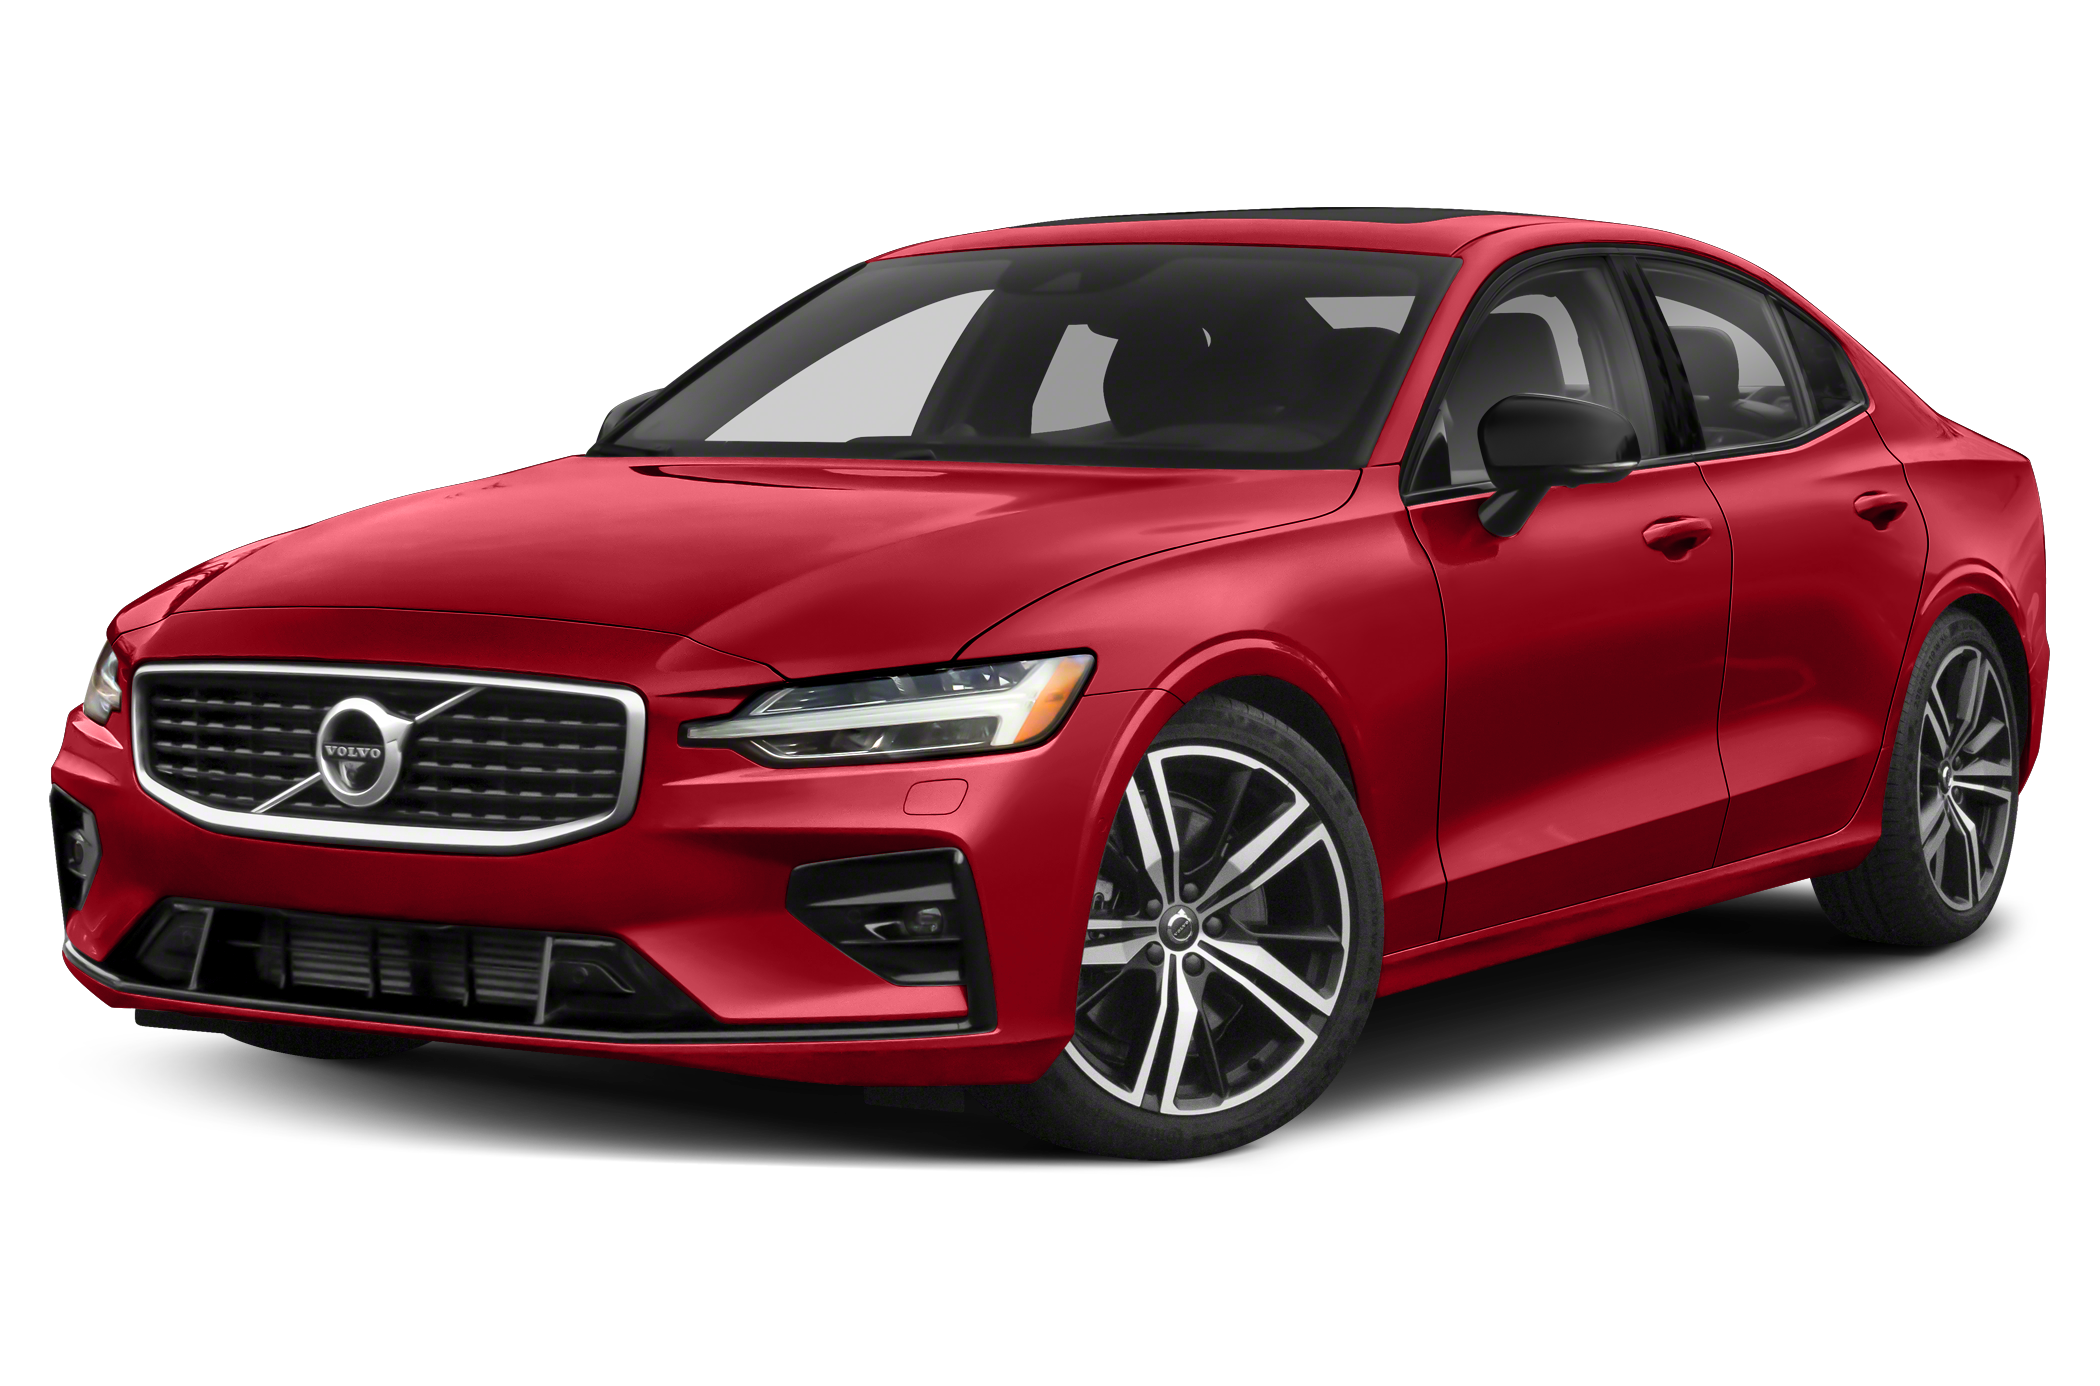 Used 2020 Volvo S60 for Sale Near Me | Cars.com